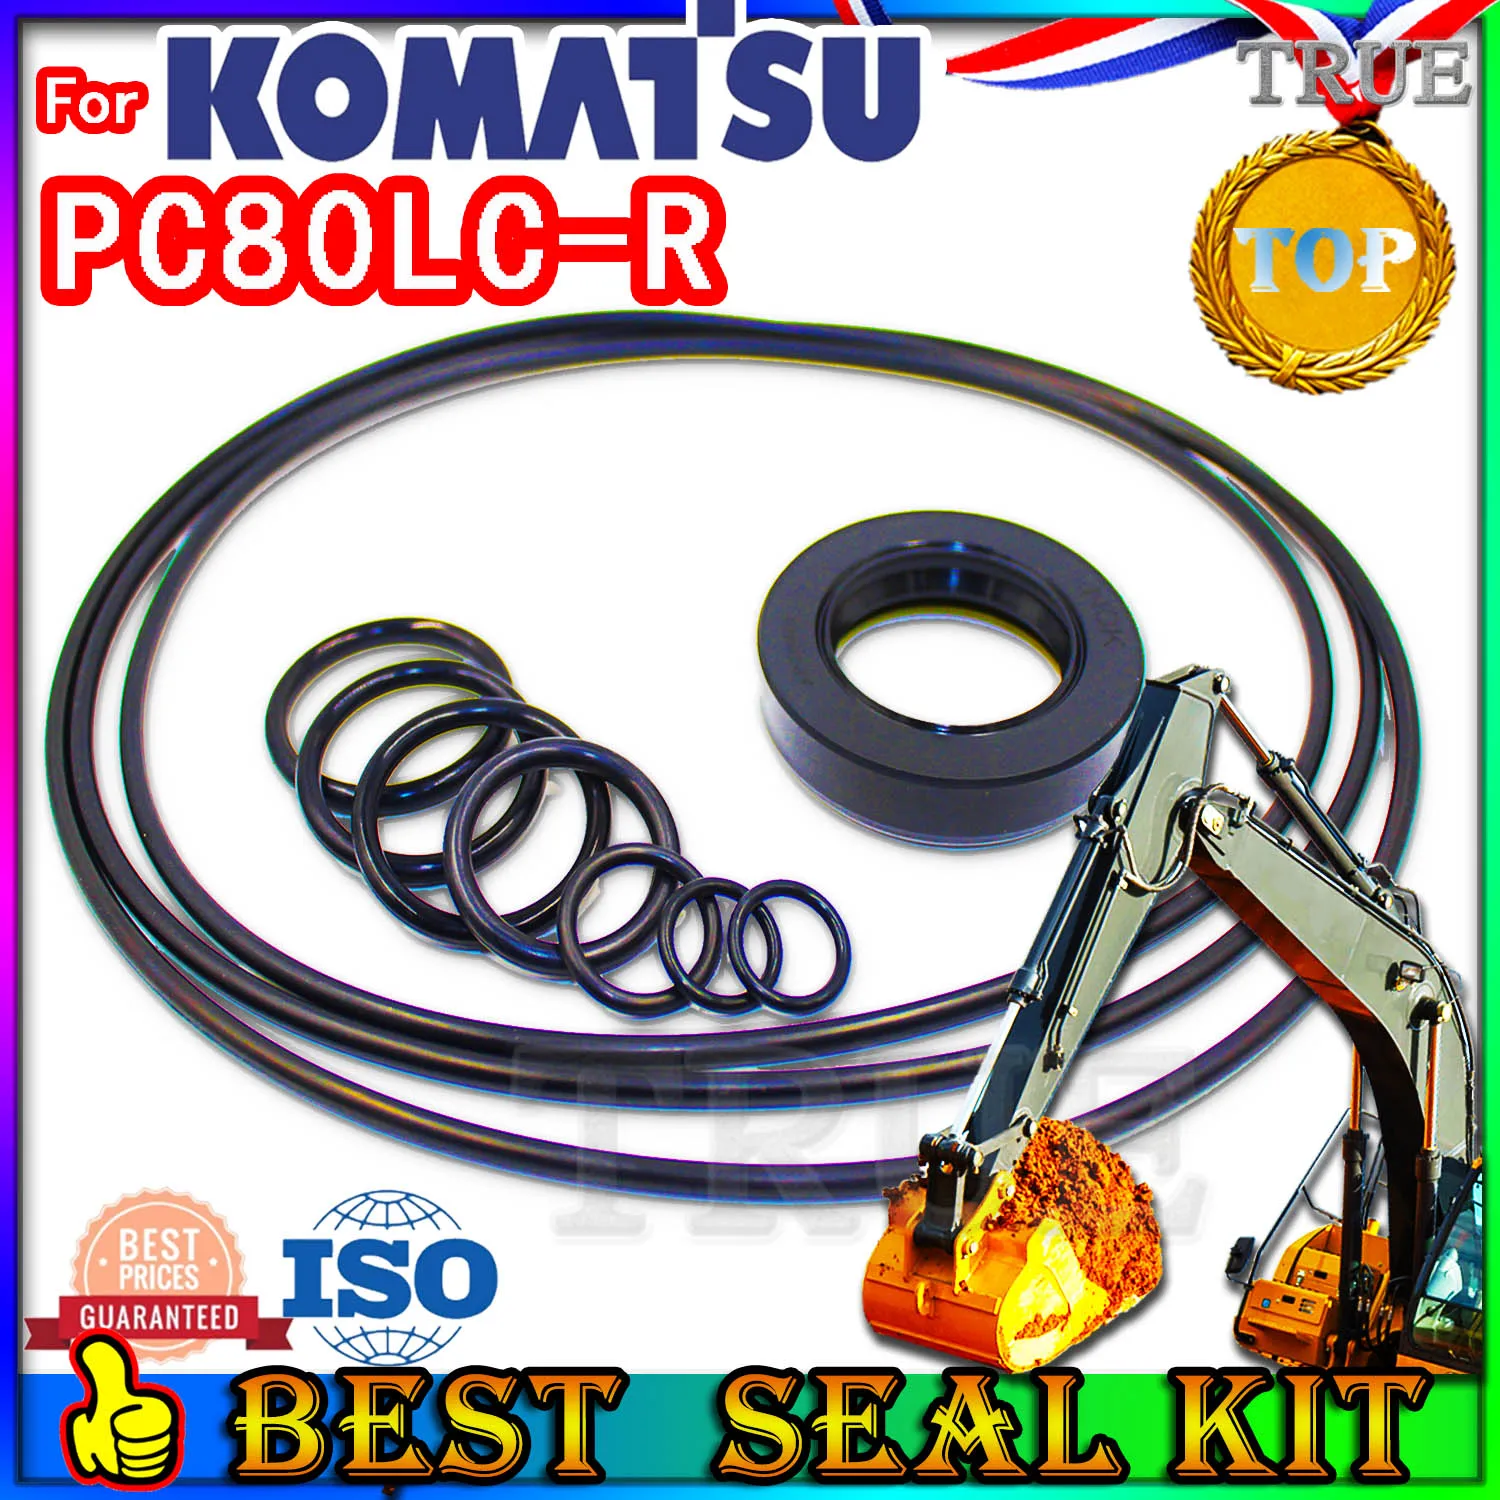 

For KOMATSU PC80LC-R Oil Seal Repair Kit Boom Arm Bucket Excavator Hydraulic Cylinder PC80LC R gearbox Mojing Fluoro rubber Main